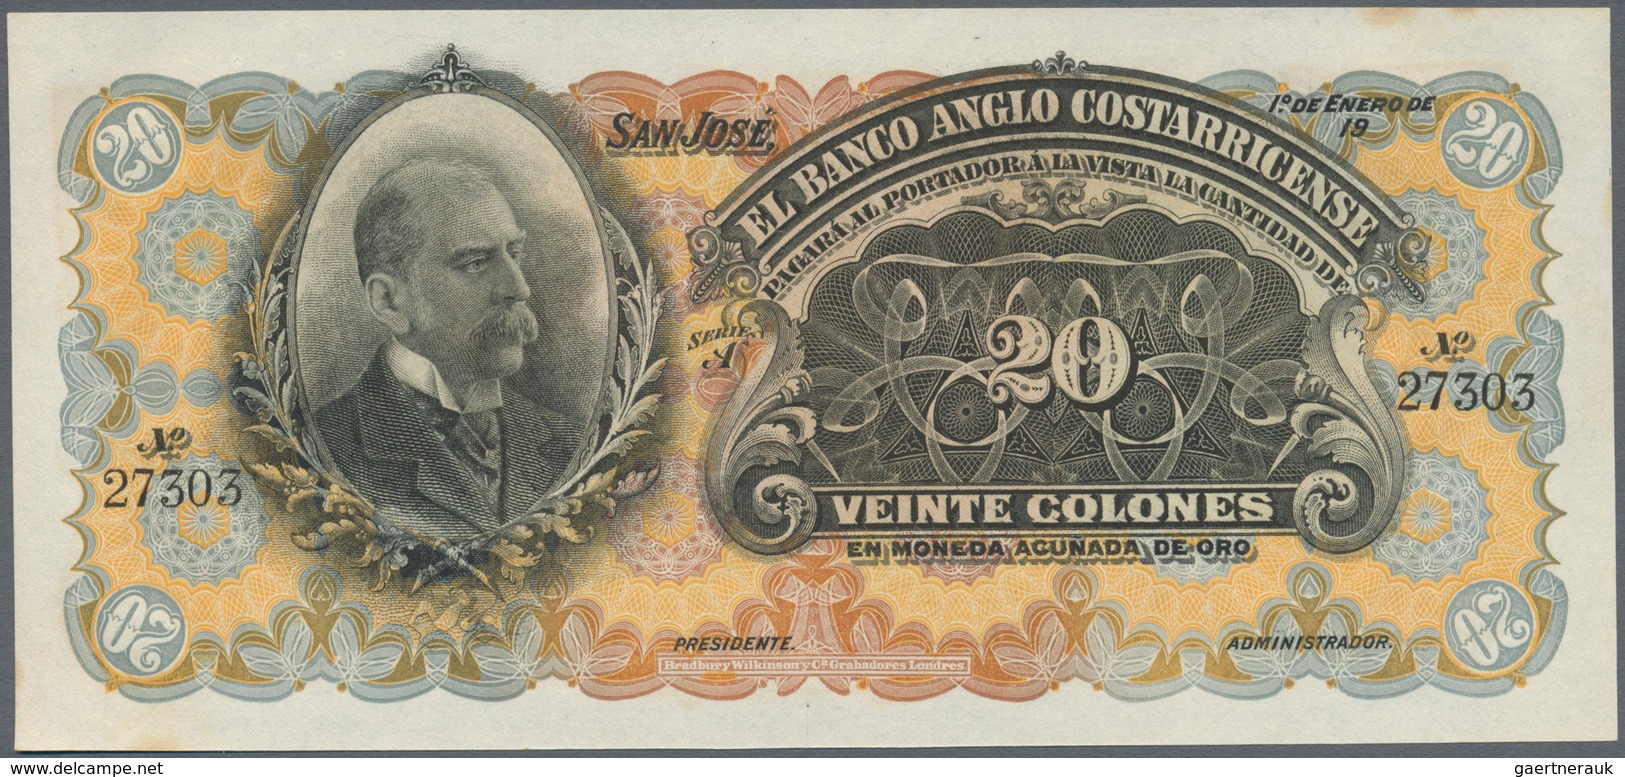 Costa Rica: 20 Colones 19xx P. S124, Unsigned Remainder, Printed "Mustra Sin Valor" On Back, Regular - Costa Rica